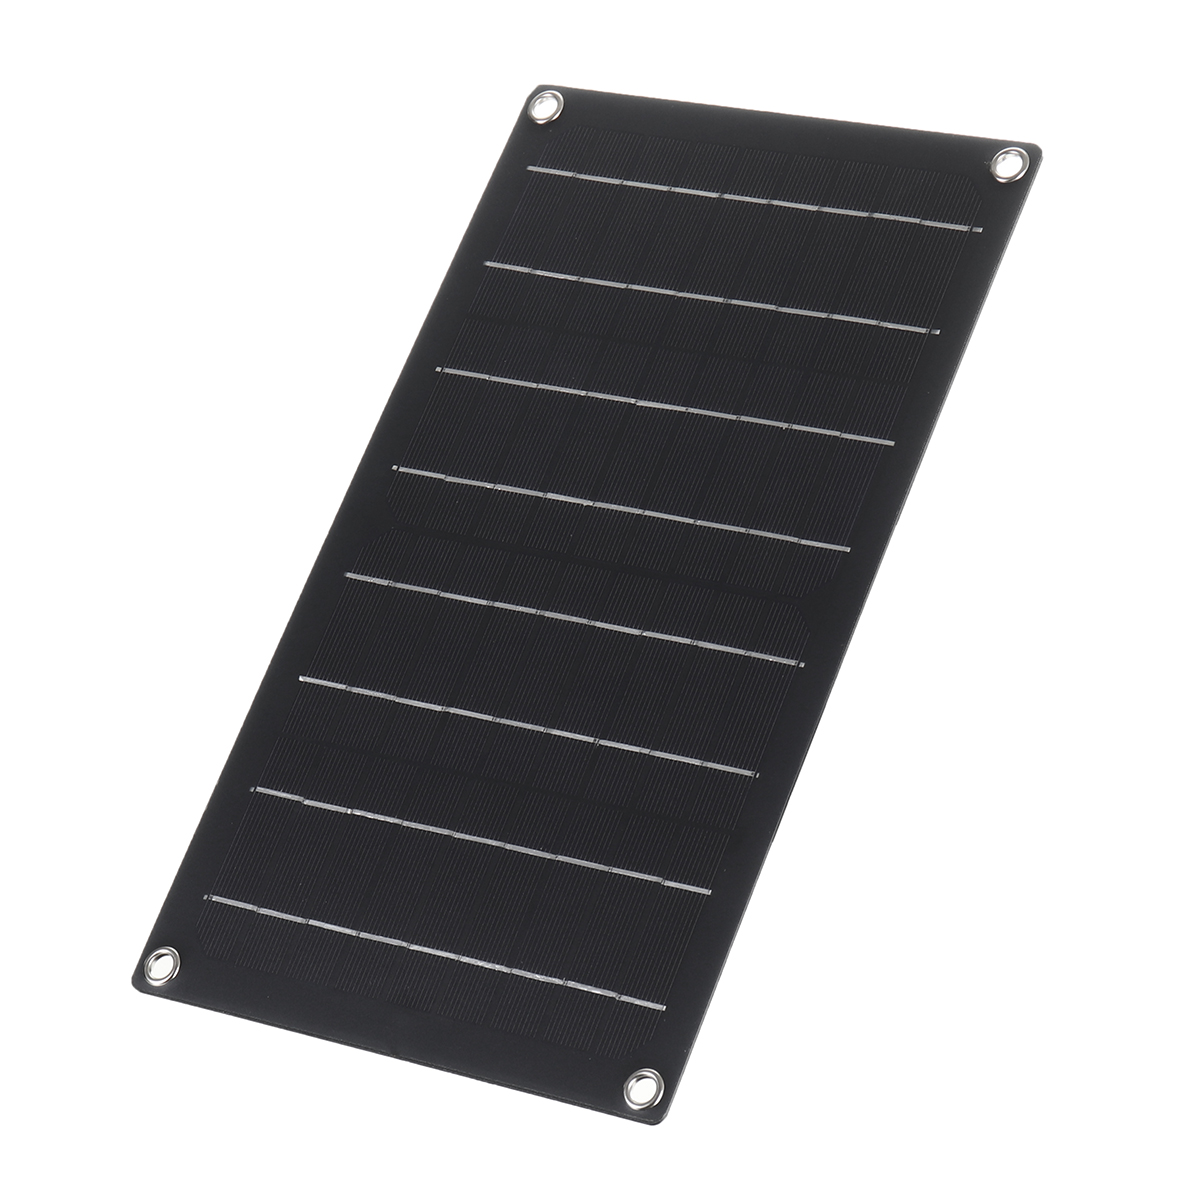 10W-ETFE-Solar-Panel-Waterproof-Car-Emergency-Charger-WIth-4-Protective-Corners-1614328-9